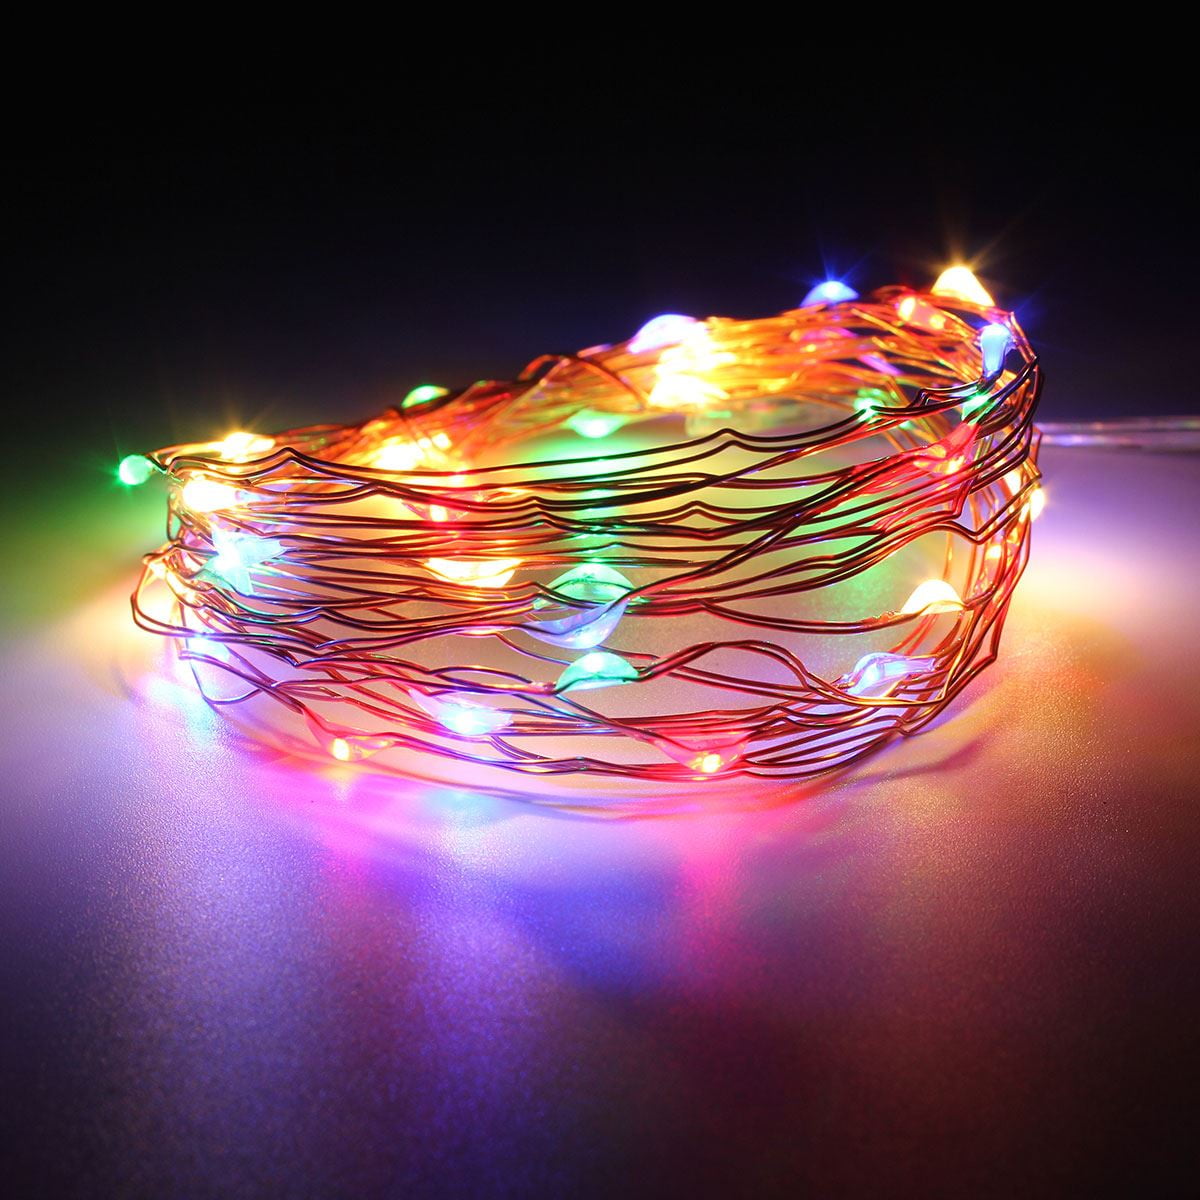 HOT 2-4M LED Battery Operated Mini Lamps LED Copper Wire String Fairy Lights 